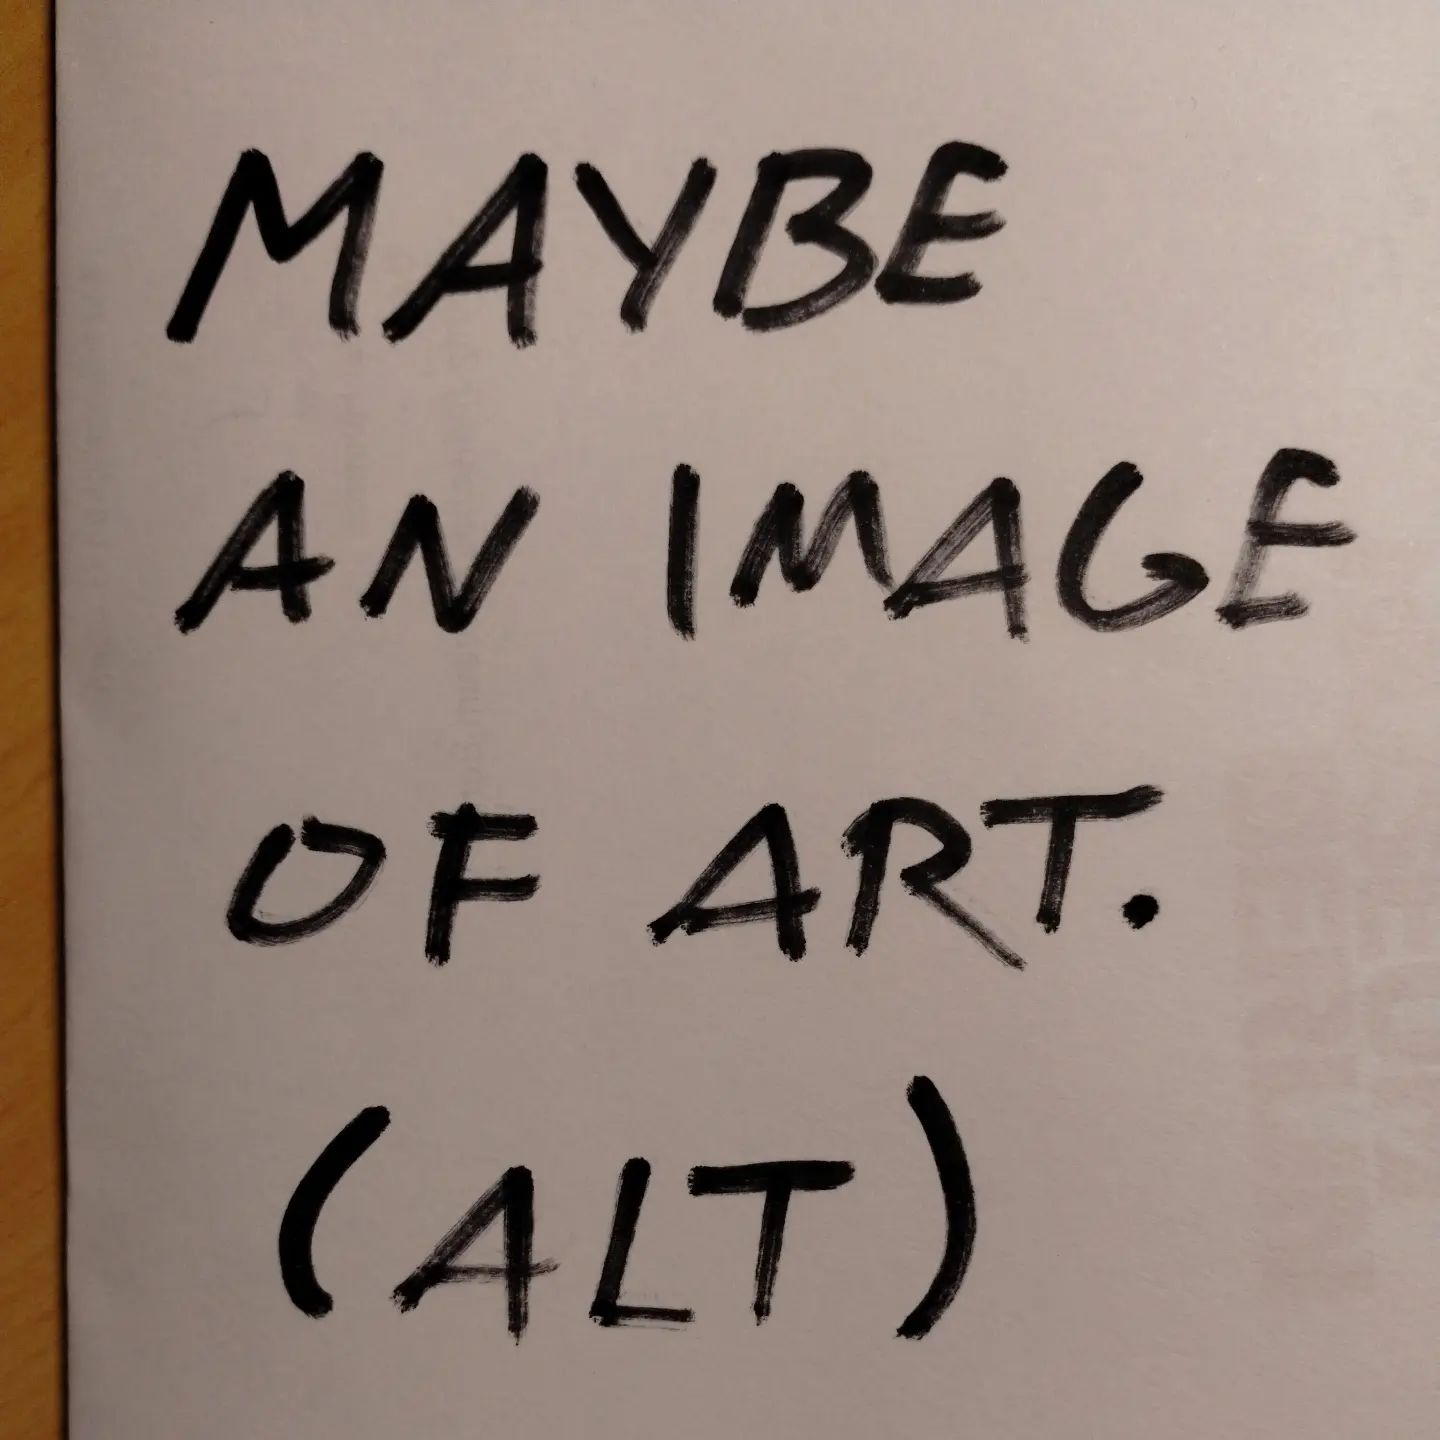 Photo of handwritten text on paper:	Maybe an image of art.	(ALT)